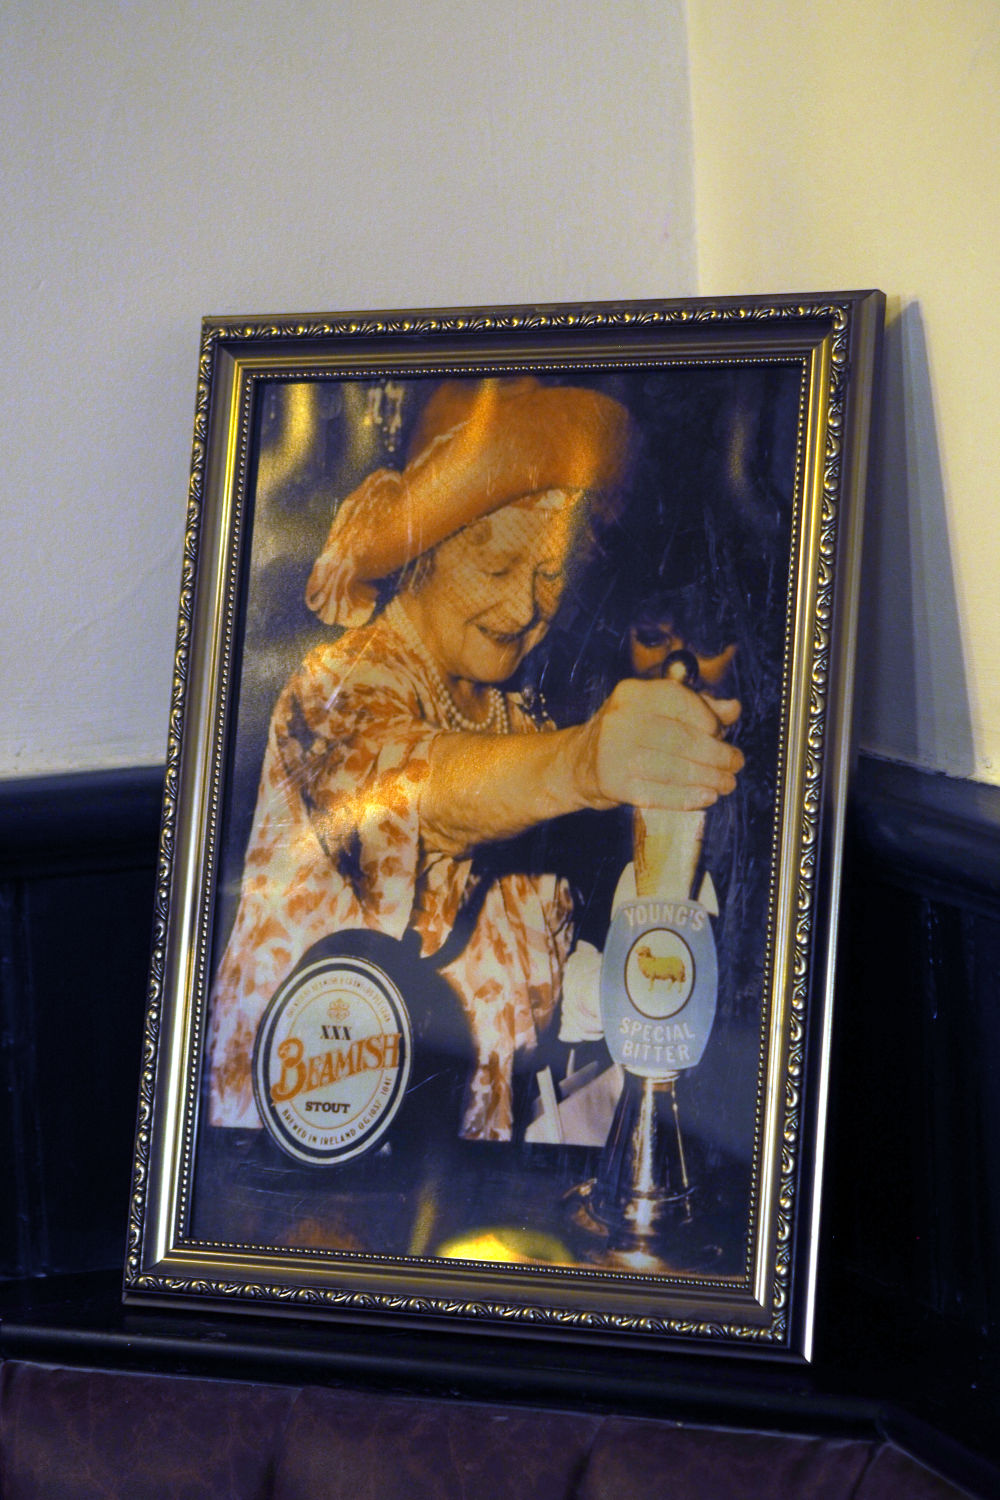 The Queen Mother pulling a pint at The Queen's Head.